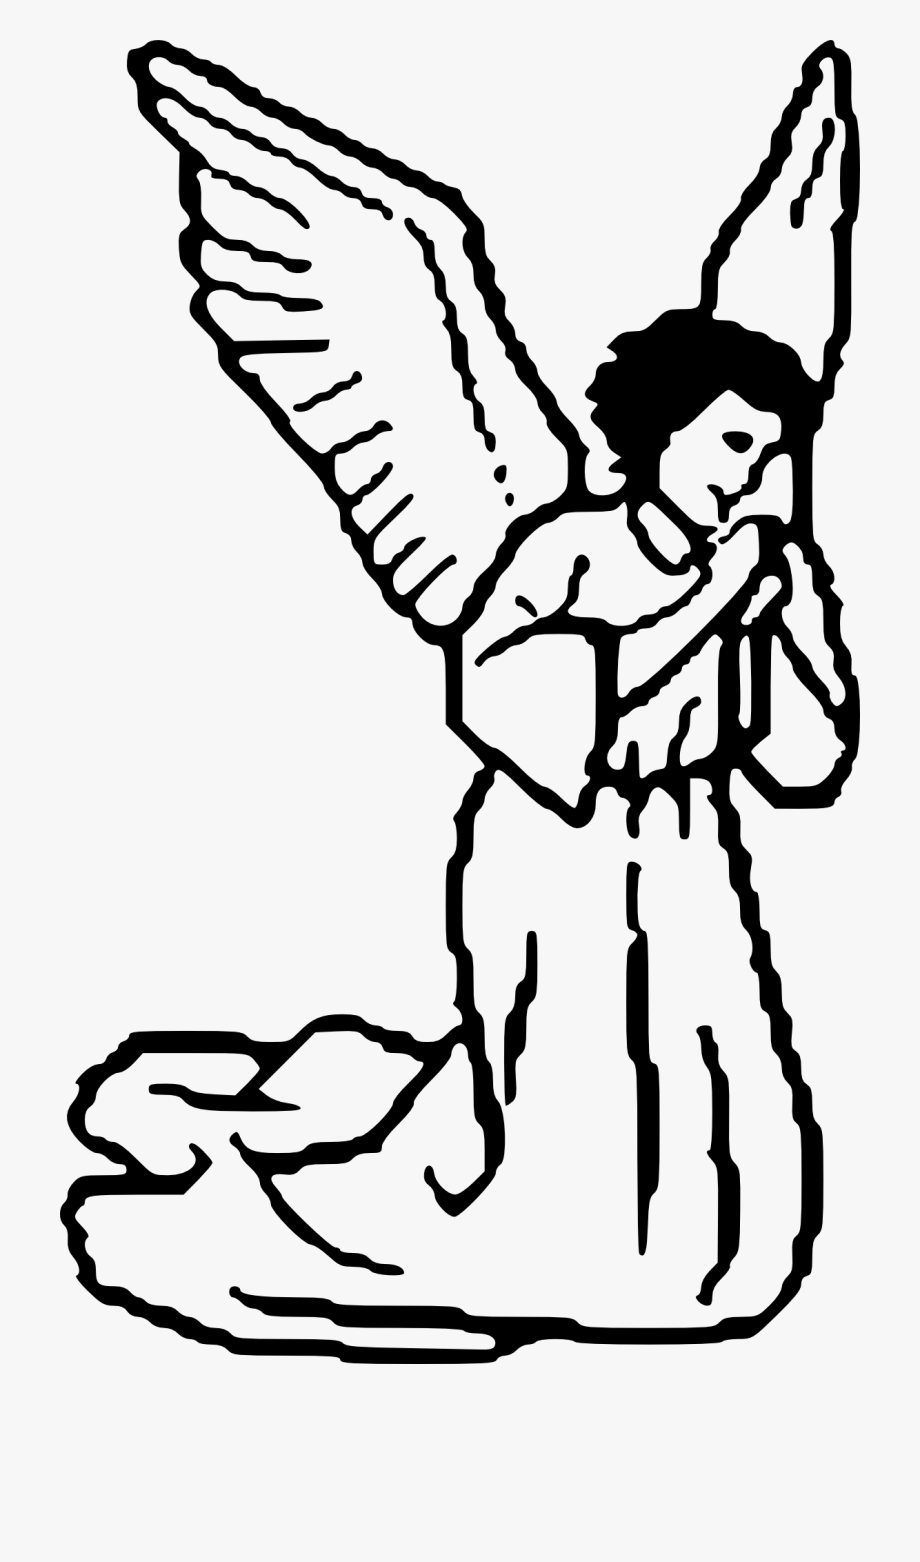 Angels clipart outline.